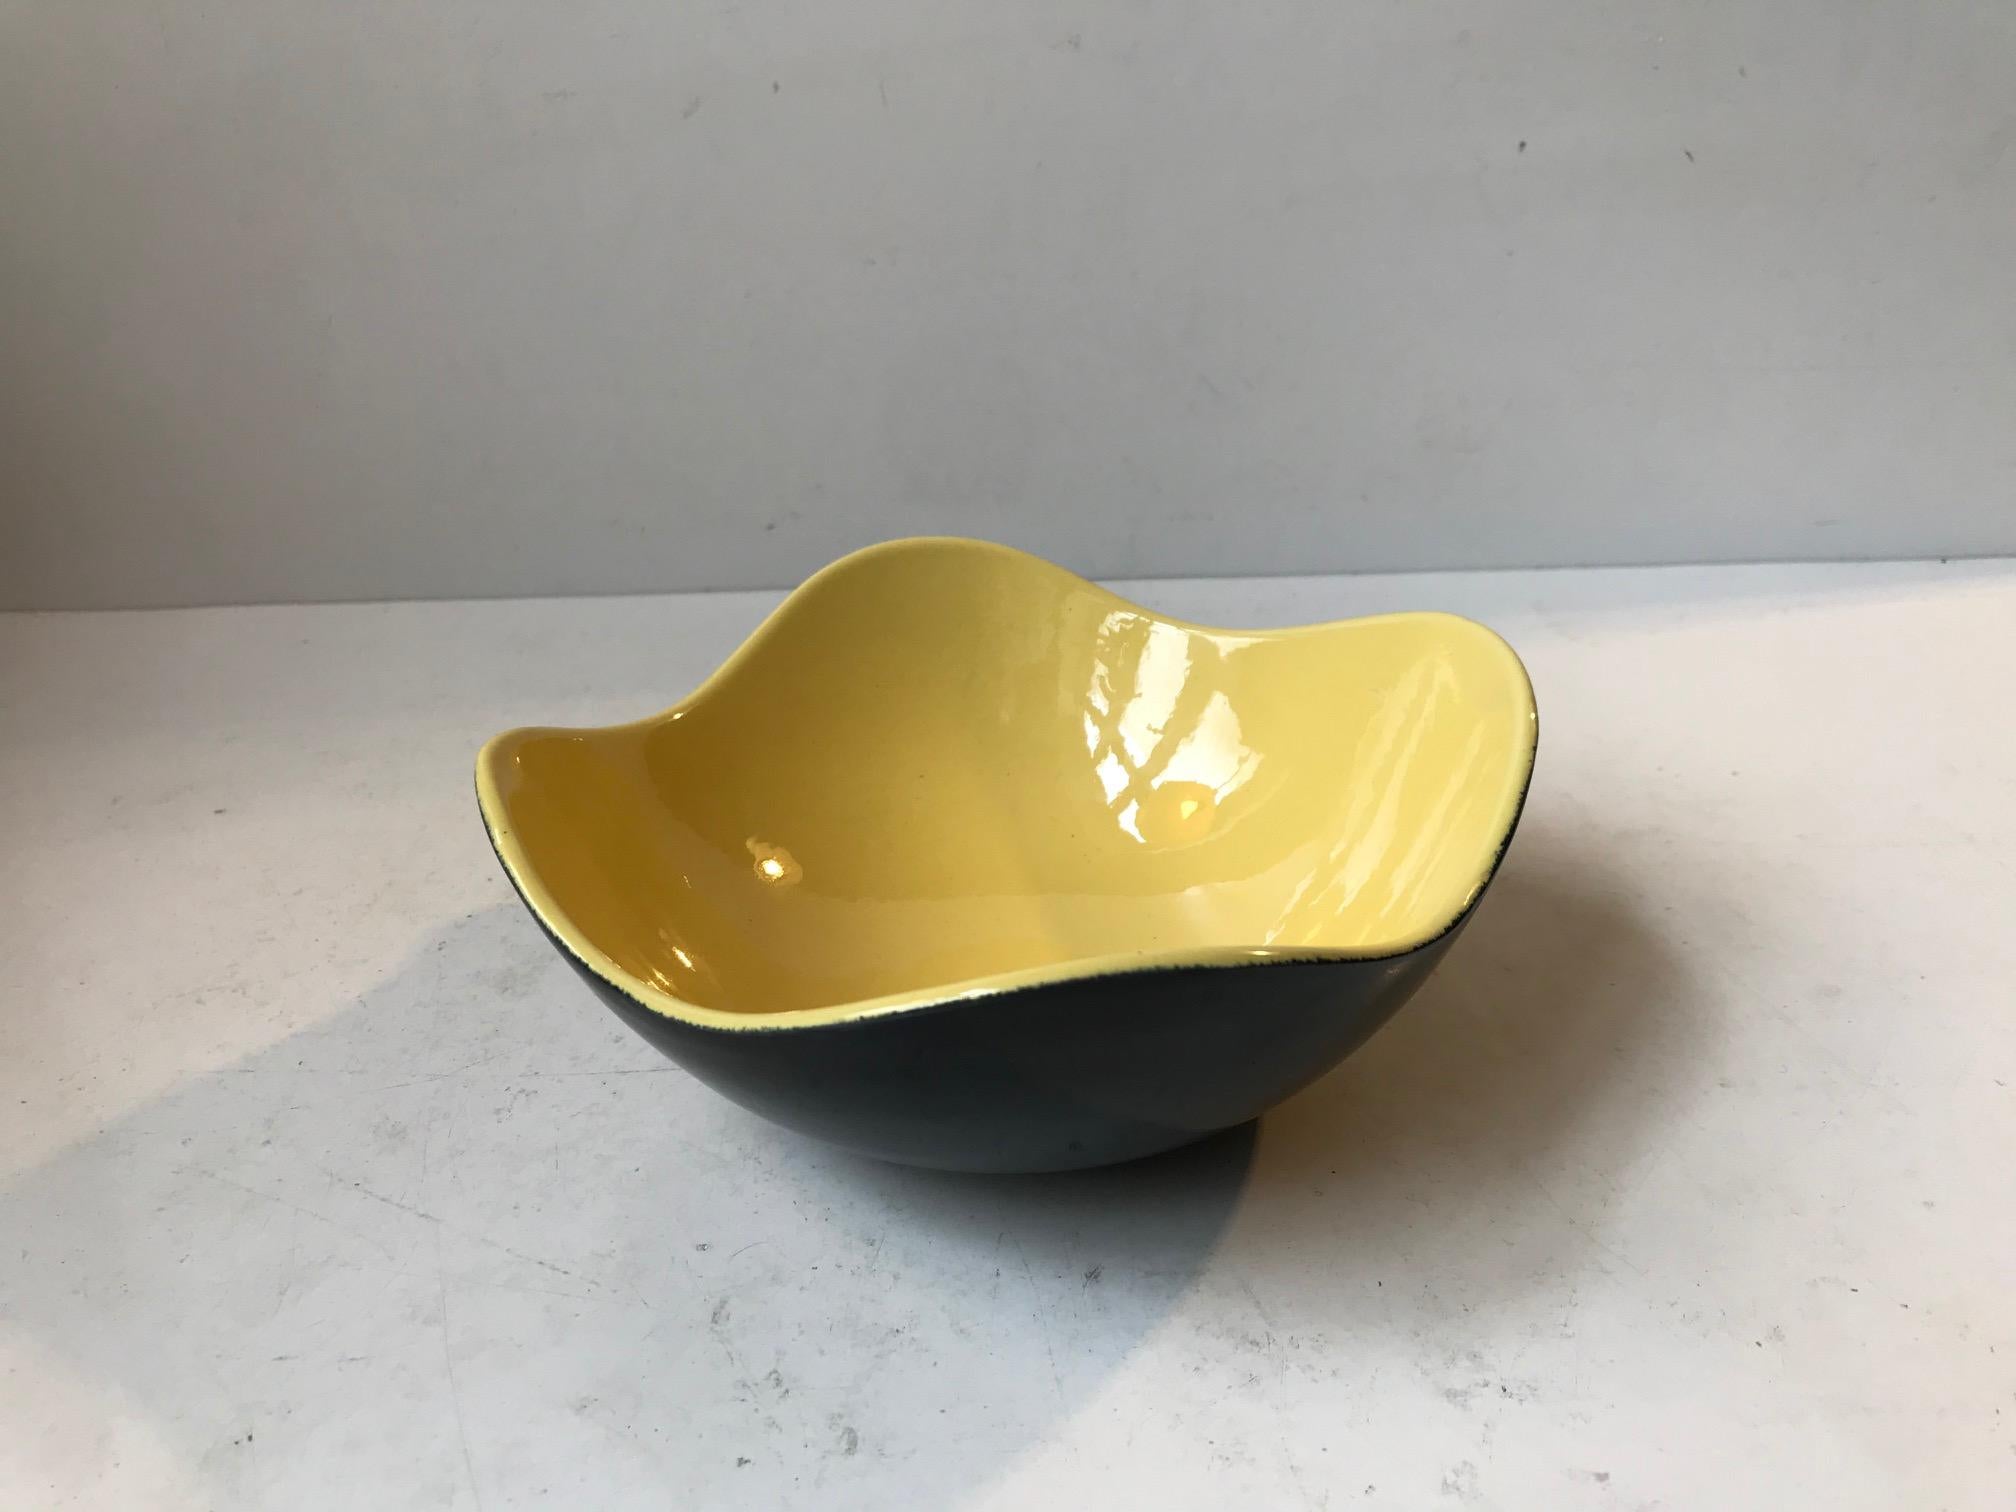 A wavy asymmetrical ceramic bowl or dish executed in black and yellow glazes. It is called Congo and was designed and manufactured by Kronjyden Randers, circa 1950-59. It measures 17 cm in diameter and has a height of 7 cm.